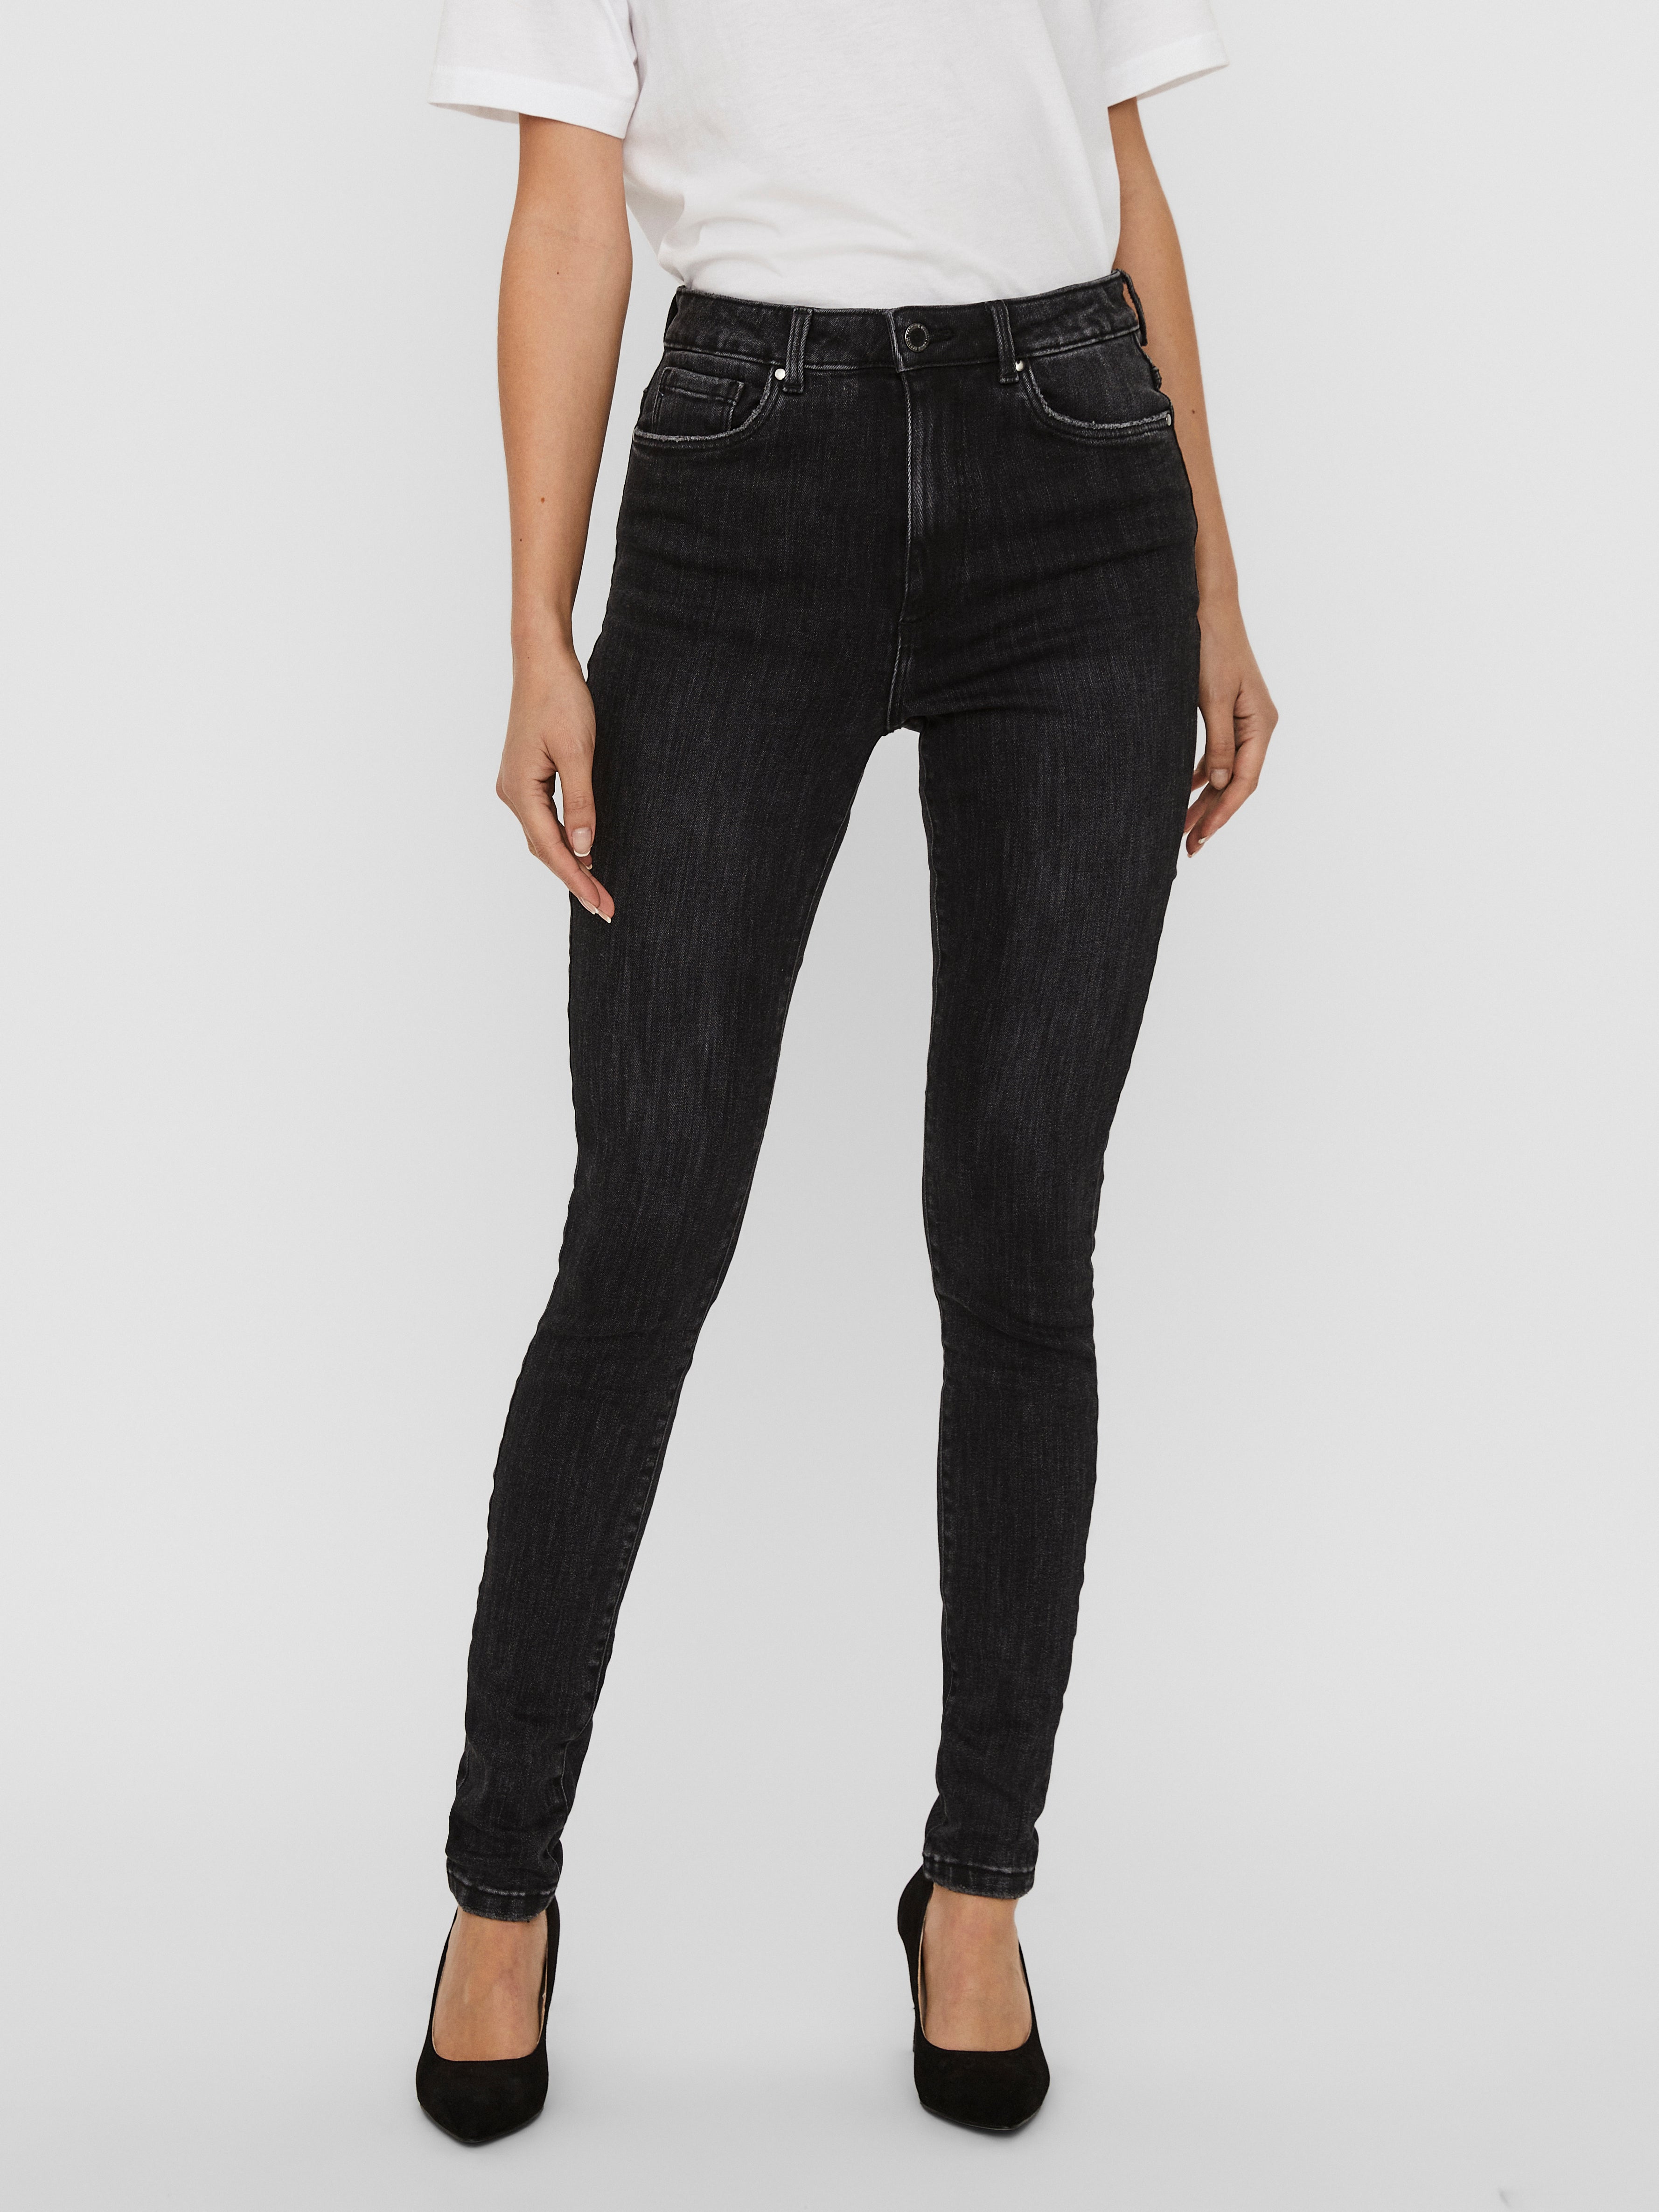 Vero Moda High Waist Jeans black-red striped pattern casual look Fashion Jeans High Waist Jeans 